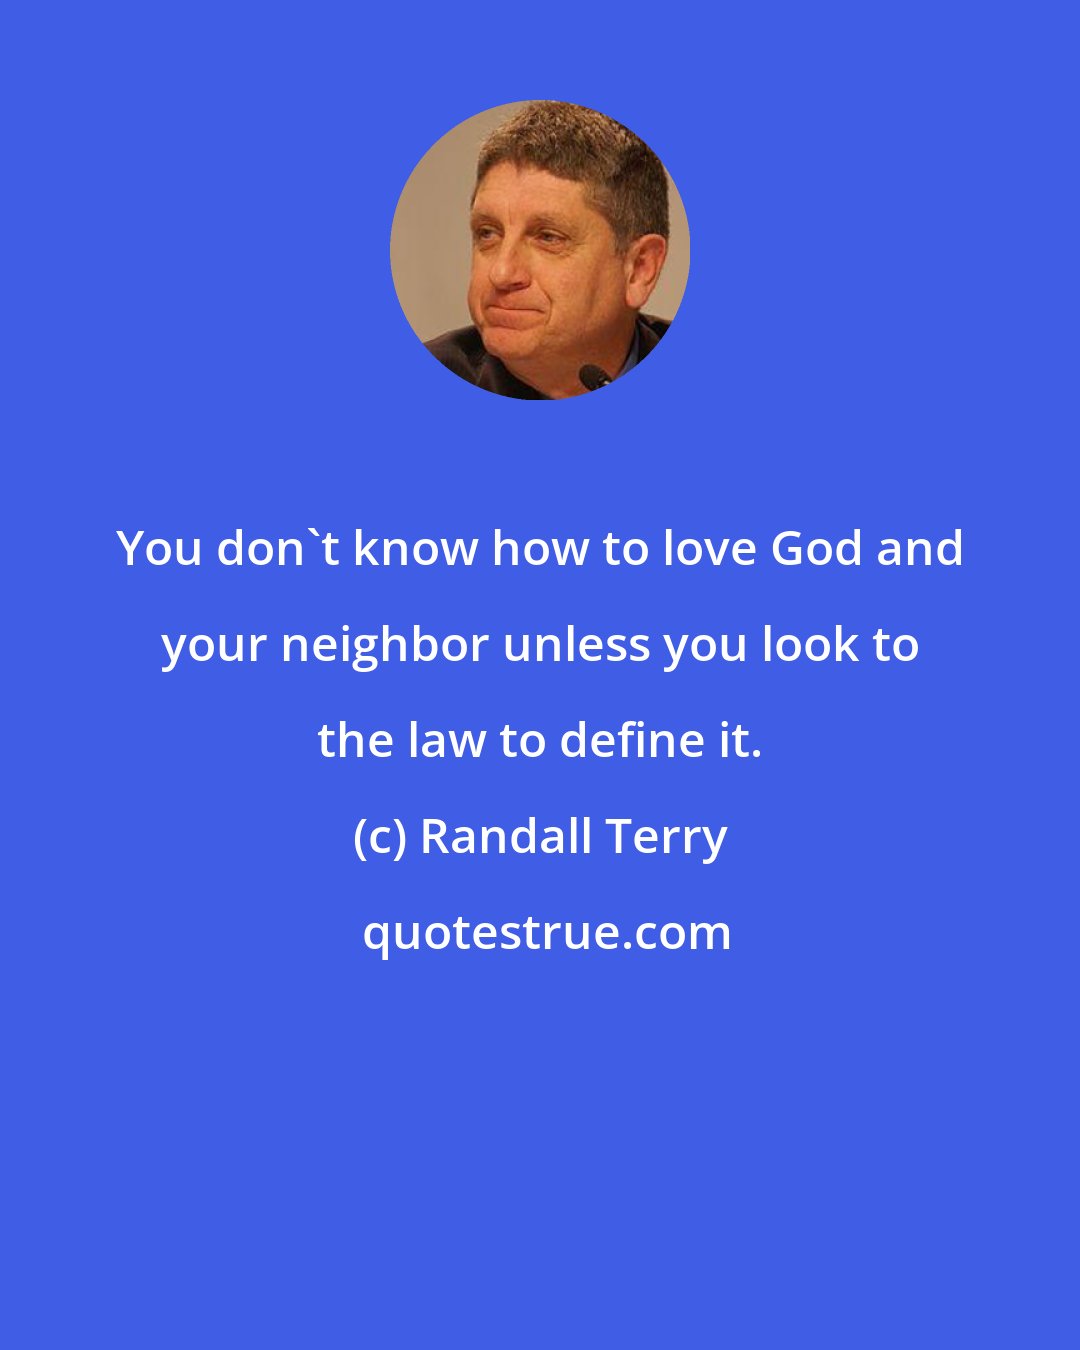 Randall Terry: You don't know how to love God and your neighbor unless you look to the law to define it.